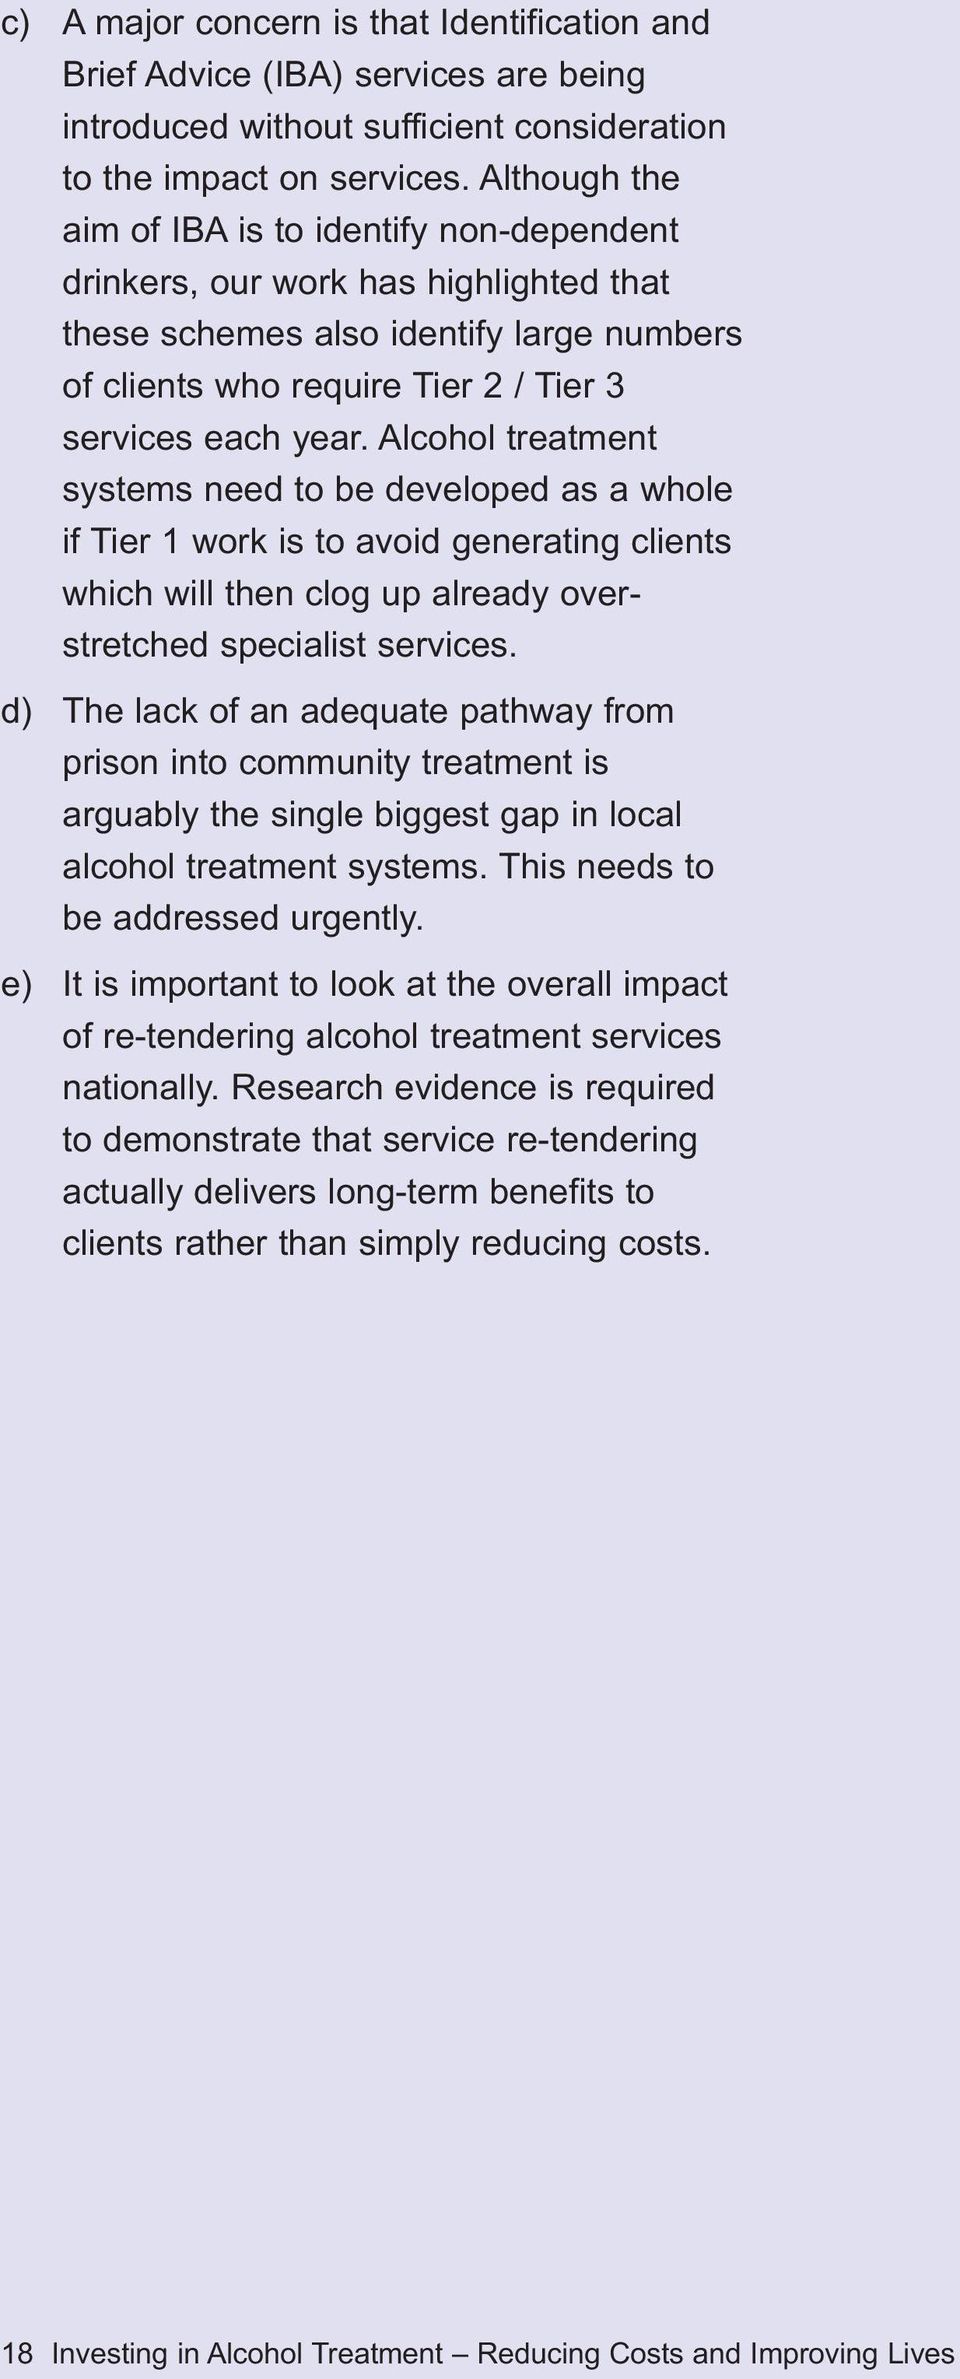 Alcohol treatment systems need to be developed as a whole if Tier 1 work is to avoid generating clients which will then clog up already overstretched specialist services.